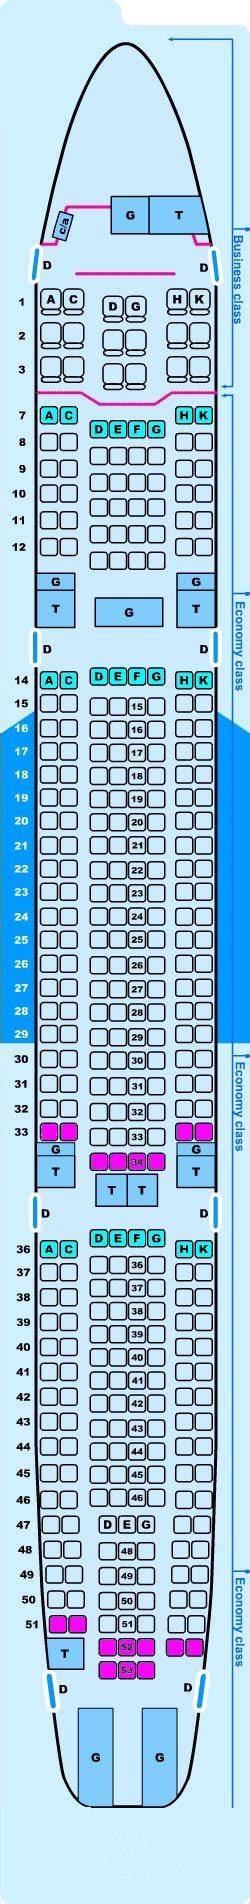 Seat Map Airbus A330 300